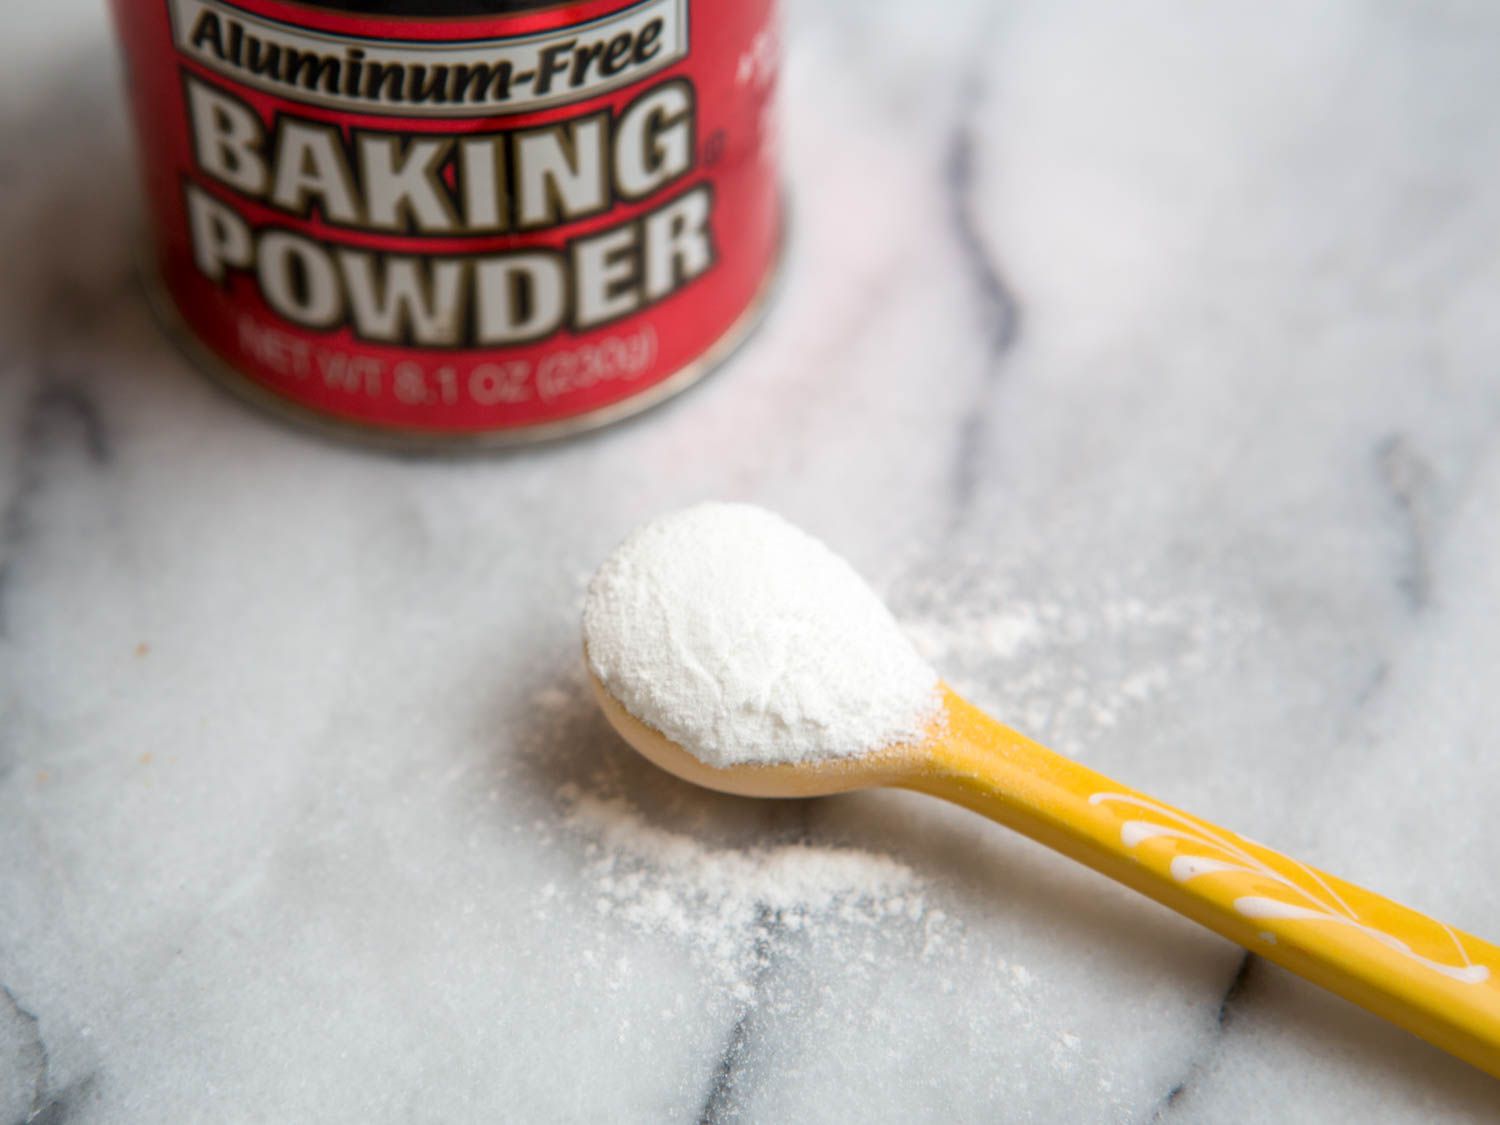 can i use baking powder to clean mattress